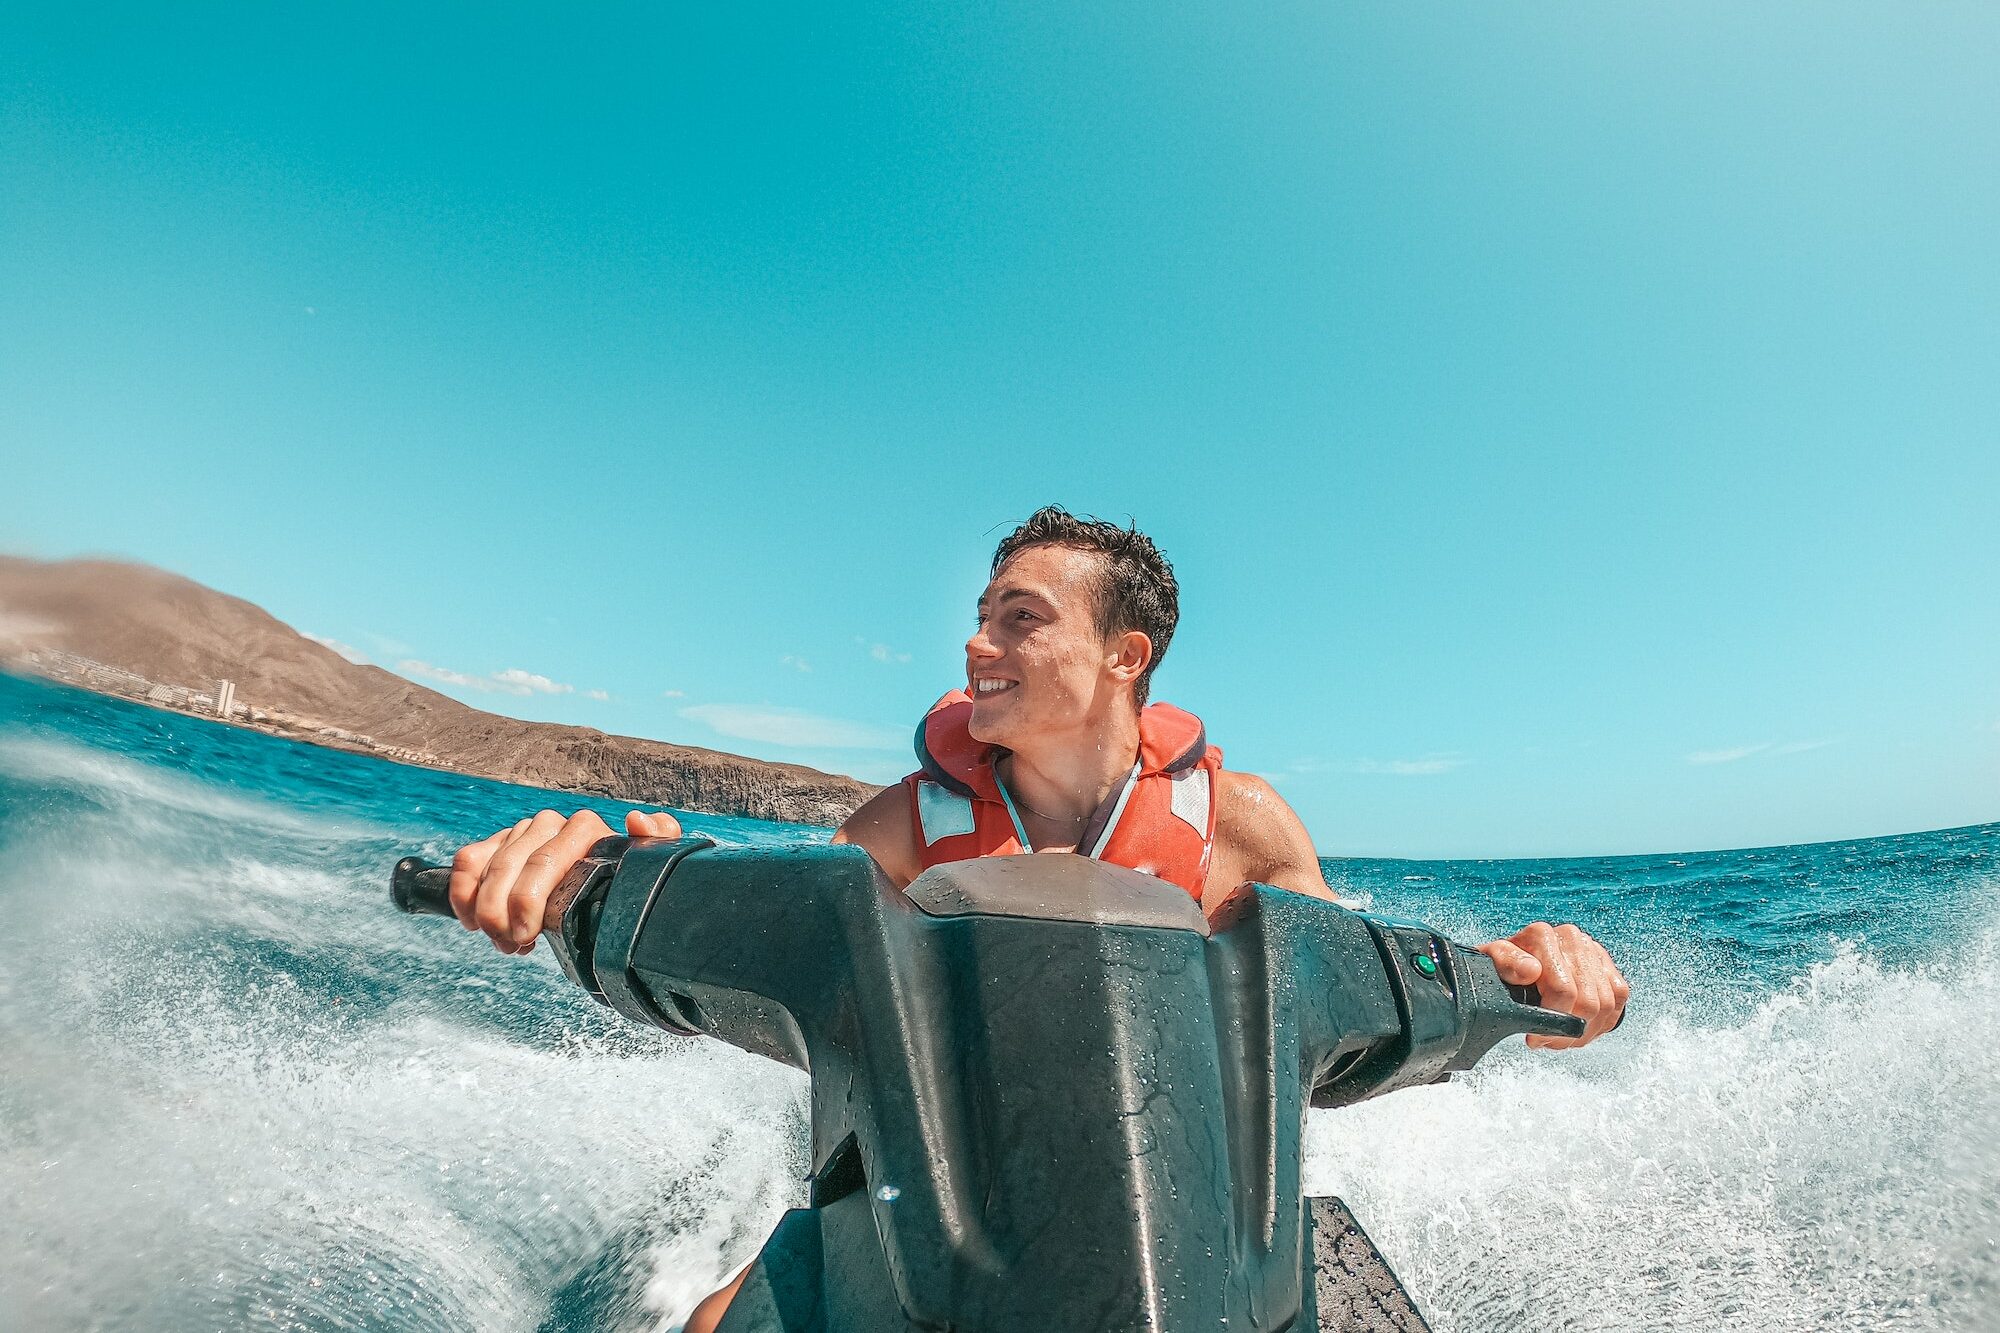 Teenager man enjoying summer in a jet ski in the middle of the sea having fun